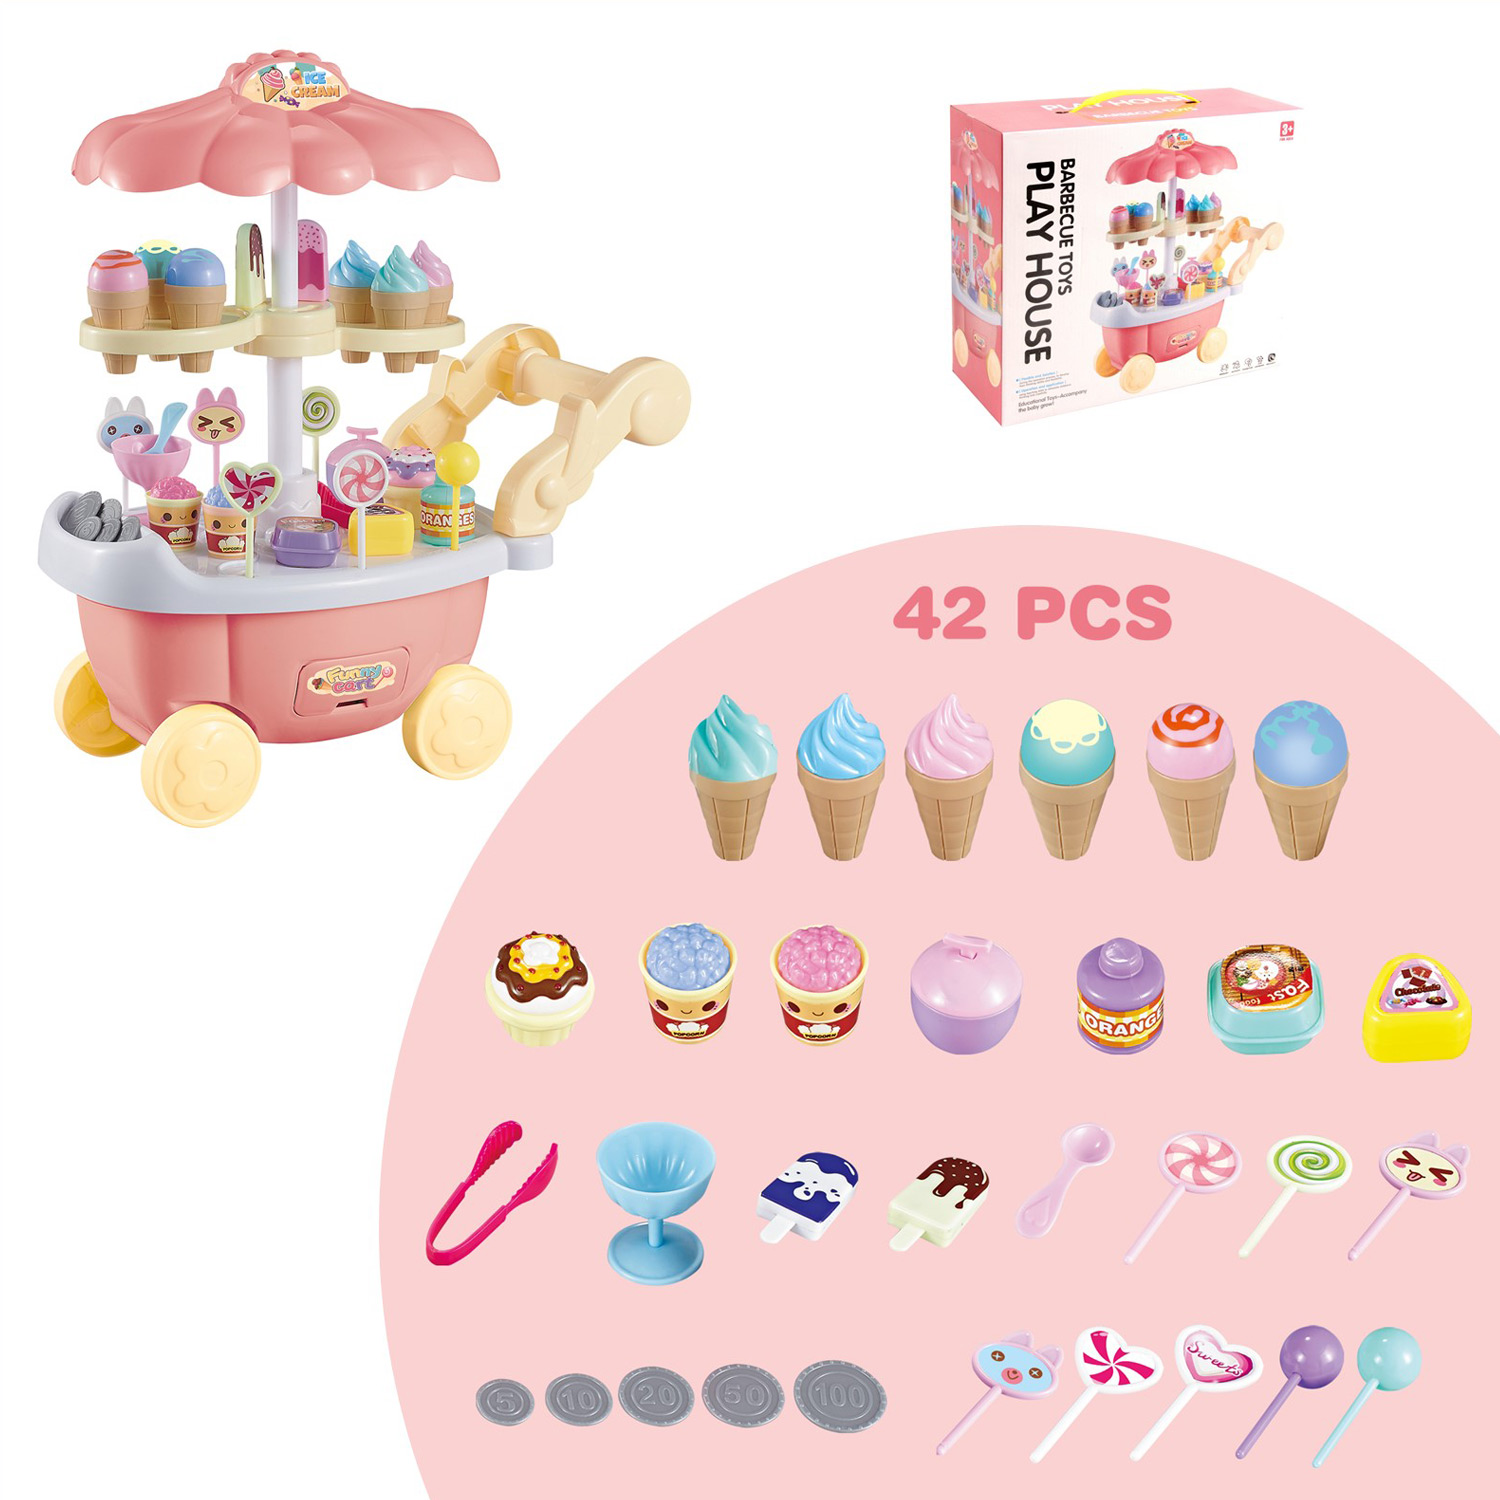 Ice Cream Cart 39 Pieces Dessert Candy Trolley Kitchen Toy Set With Lights Music Includes Umbrella Food Accessories 3 feet tall Children's Pretend Play Truck Playset Appliance Set Pieces Perfect For Early Learning Educational Girls Cooking TK-10